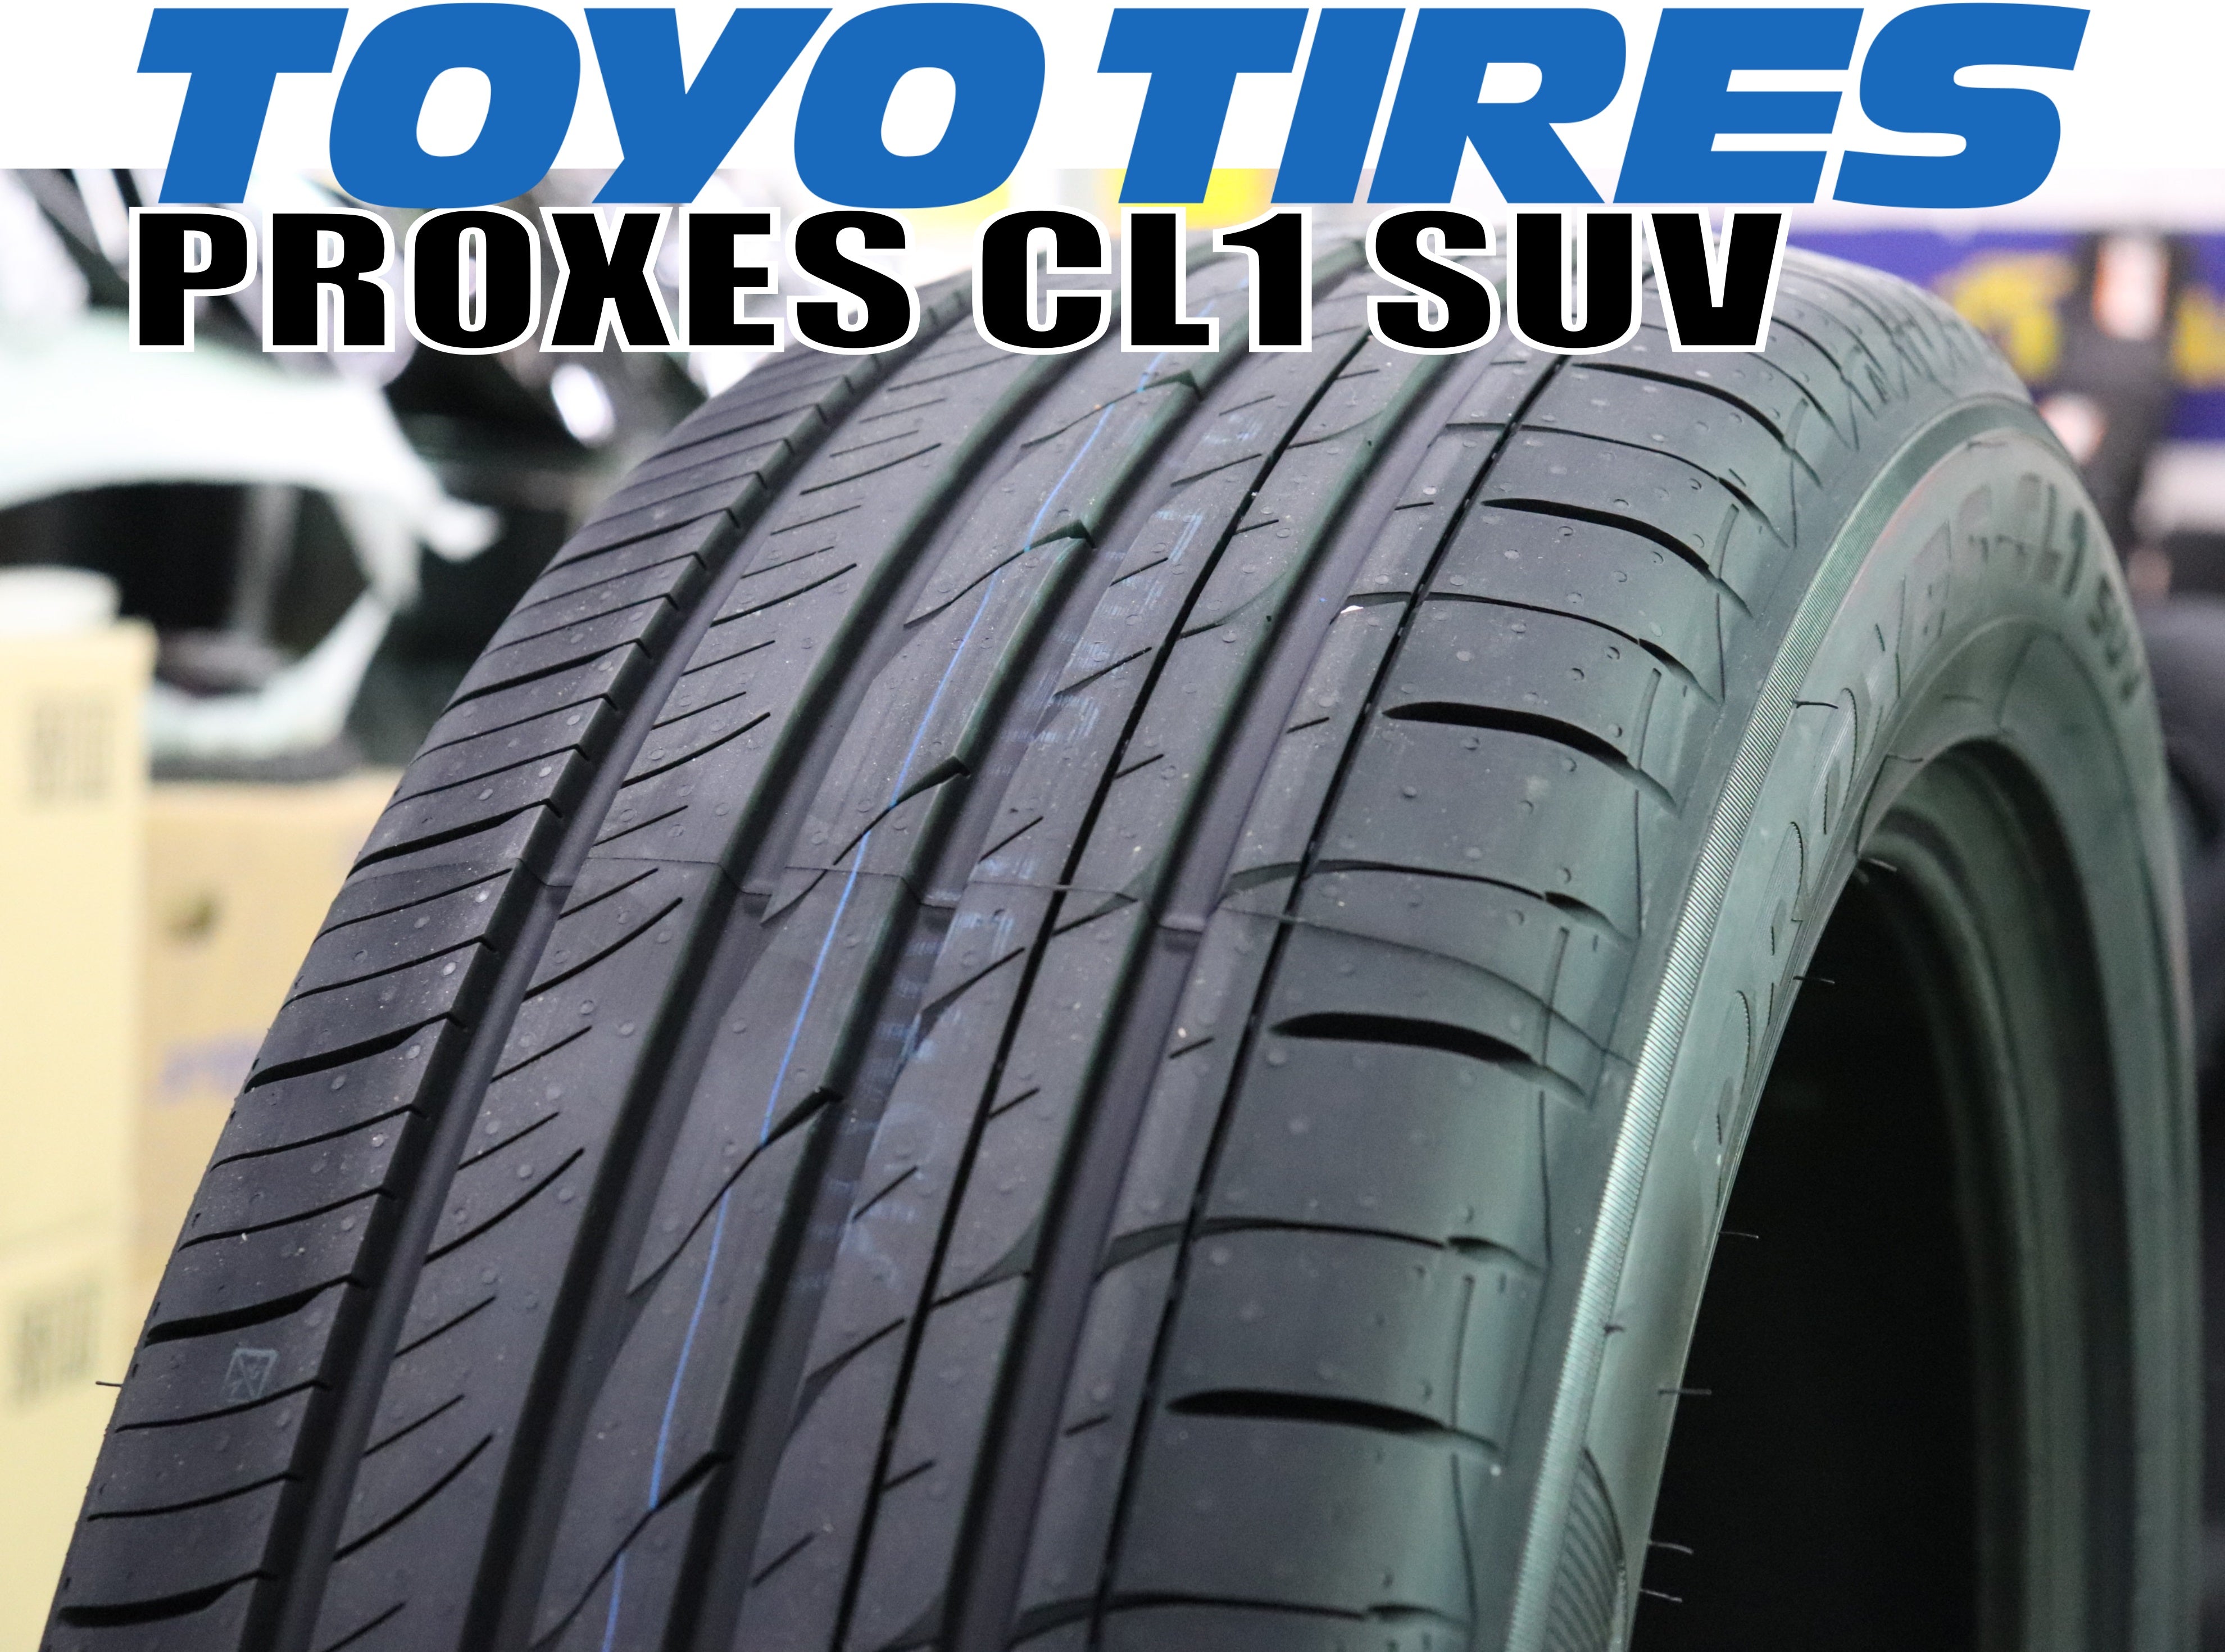 TOYO TIRES PROXES CL1SUV（トーヨー プロクセス） 215/60R17 96H 215/60-17